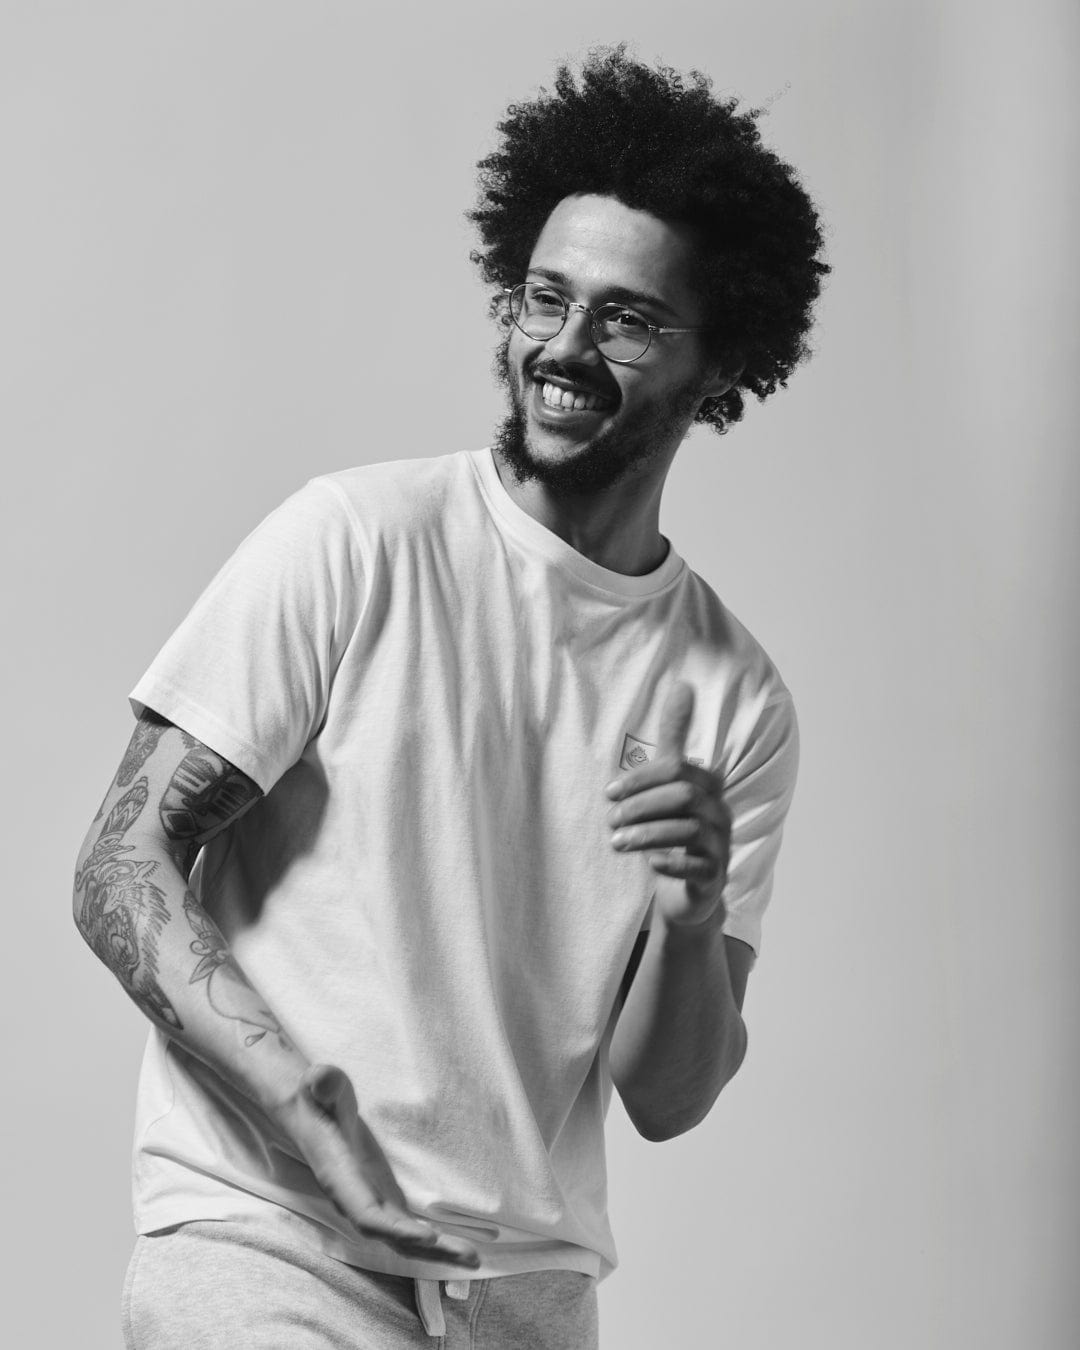 A black and white photo of a man with afro hair and tattoos, wearing the Saltrock Corp 20 Men's Short Sleeve T-shirt - Blue, taking on adventures.